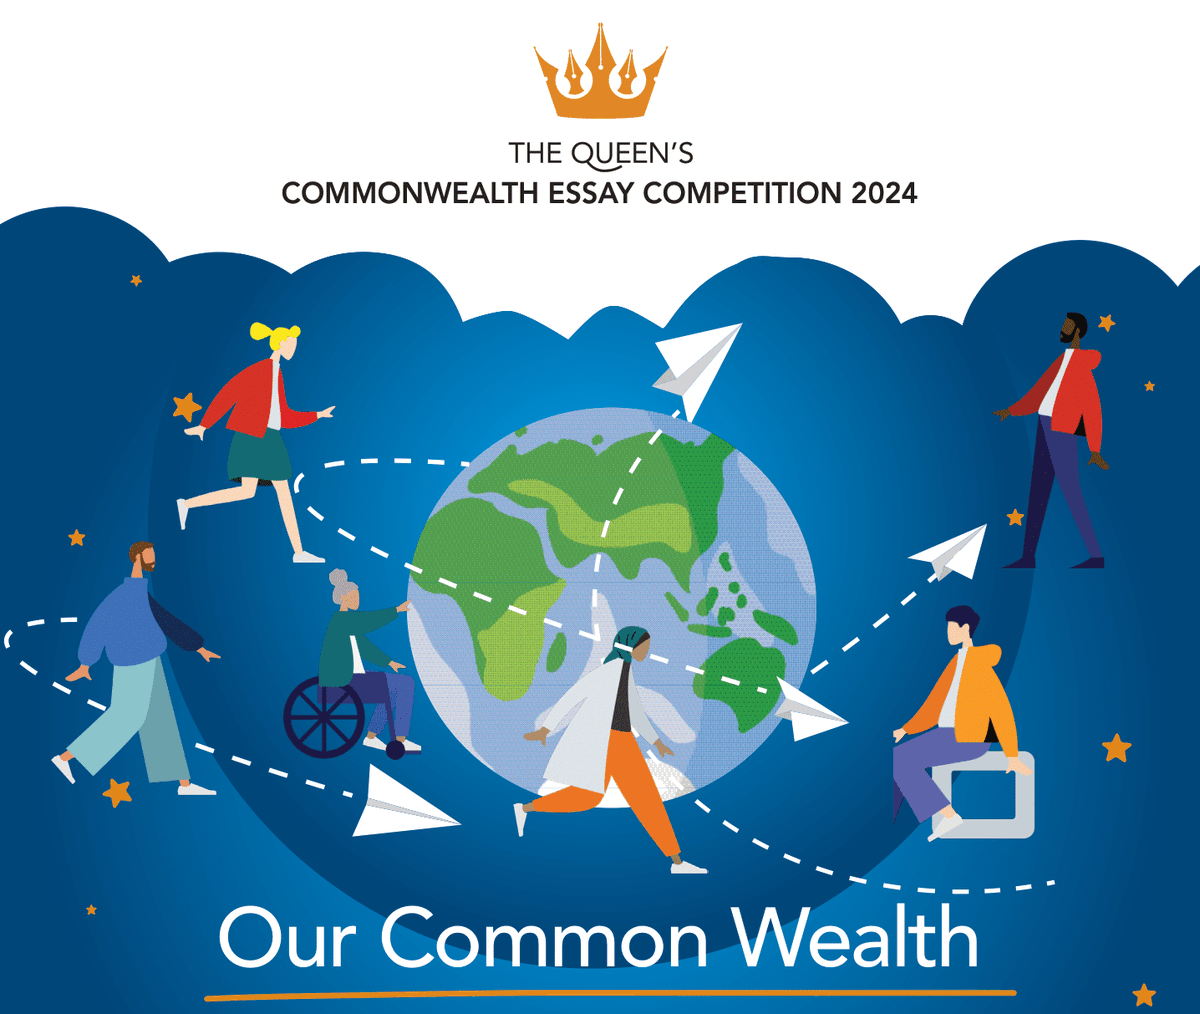 The Queen’s Commonwealth Essay Competition 2024 is now open until 15 May. There are two categories in the competition: a) Senior Category (14-18 Years of age) b) under 14 years of age. Good luck as you submit an entry to #QCEC2024 #ourCommonwealth #Commonwealth